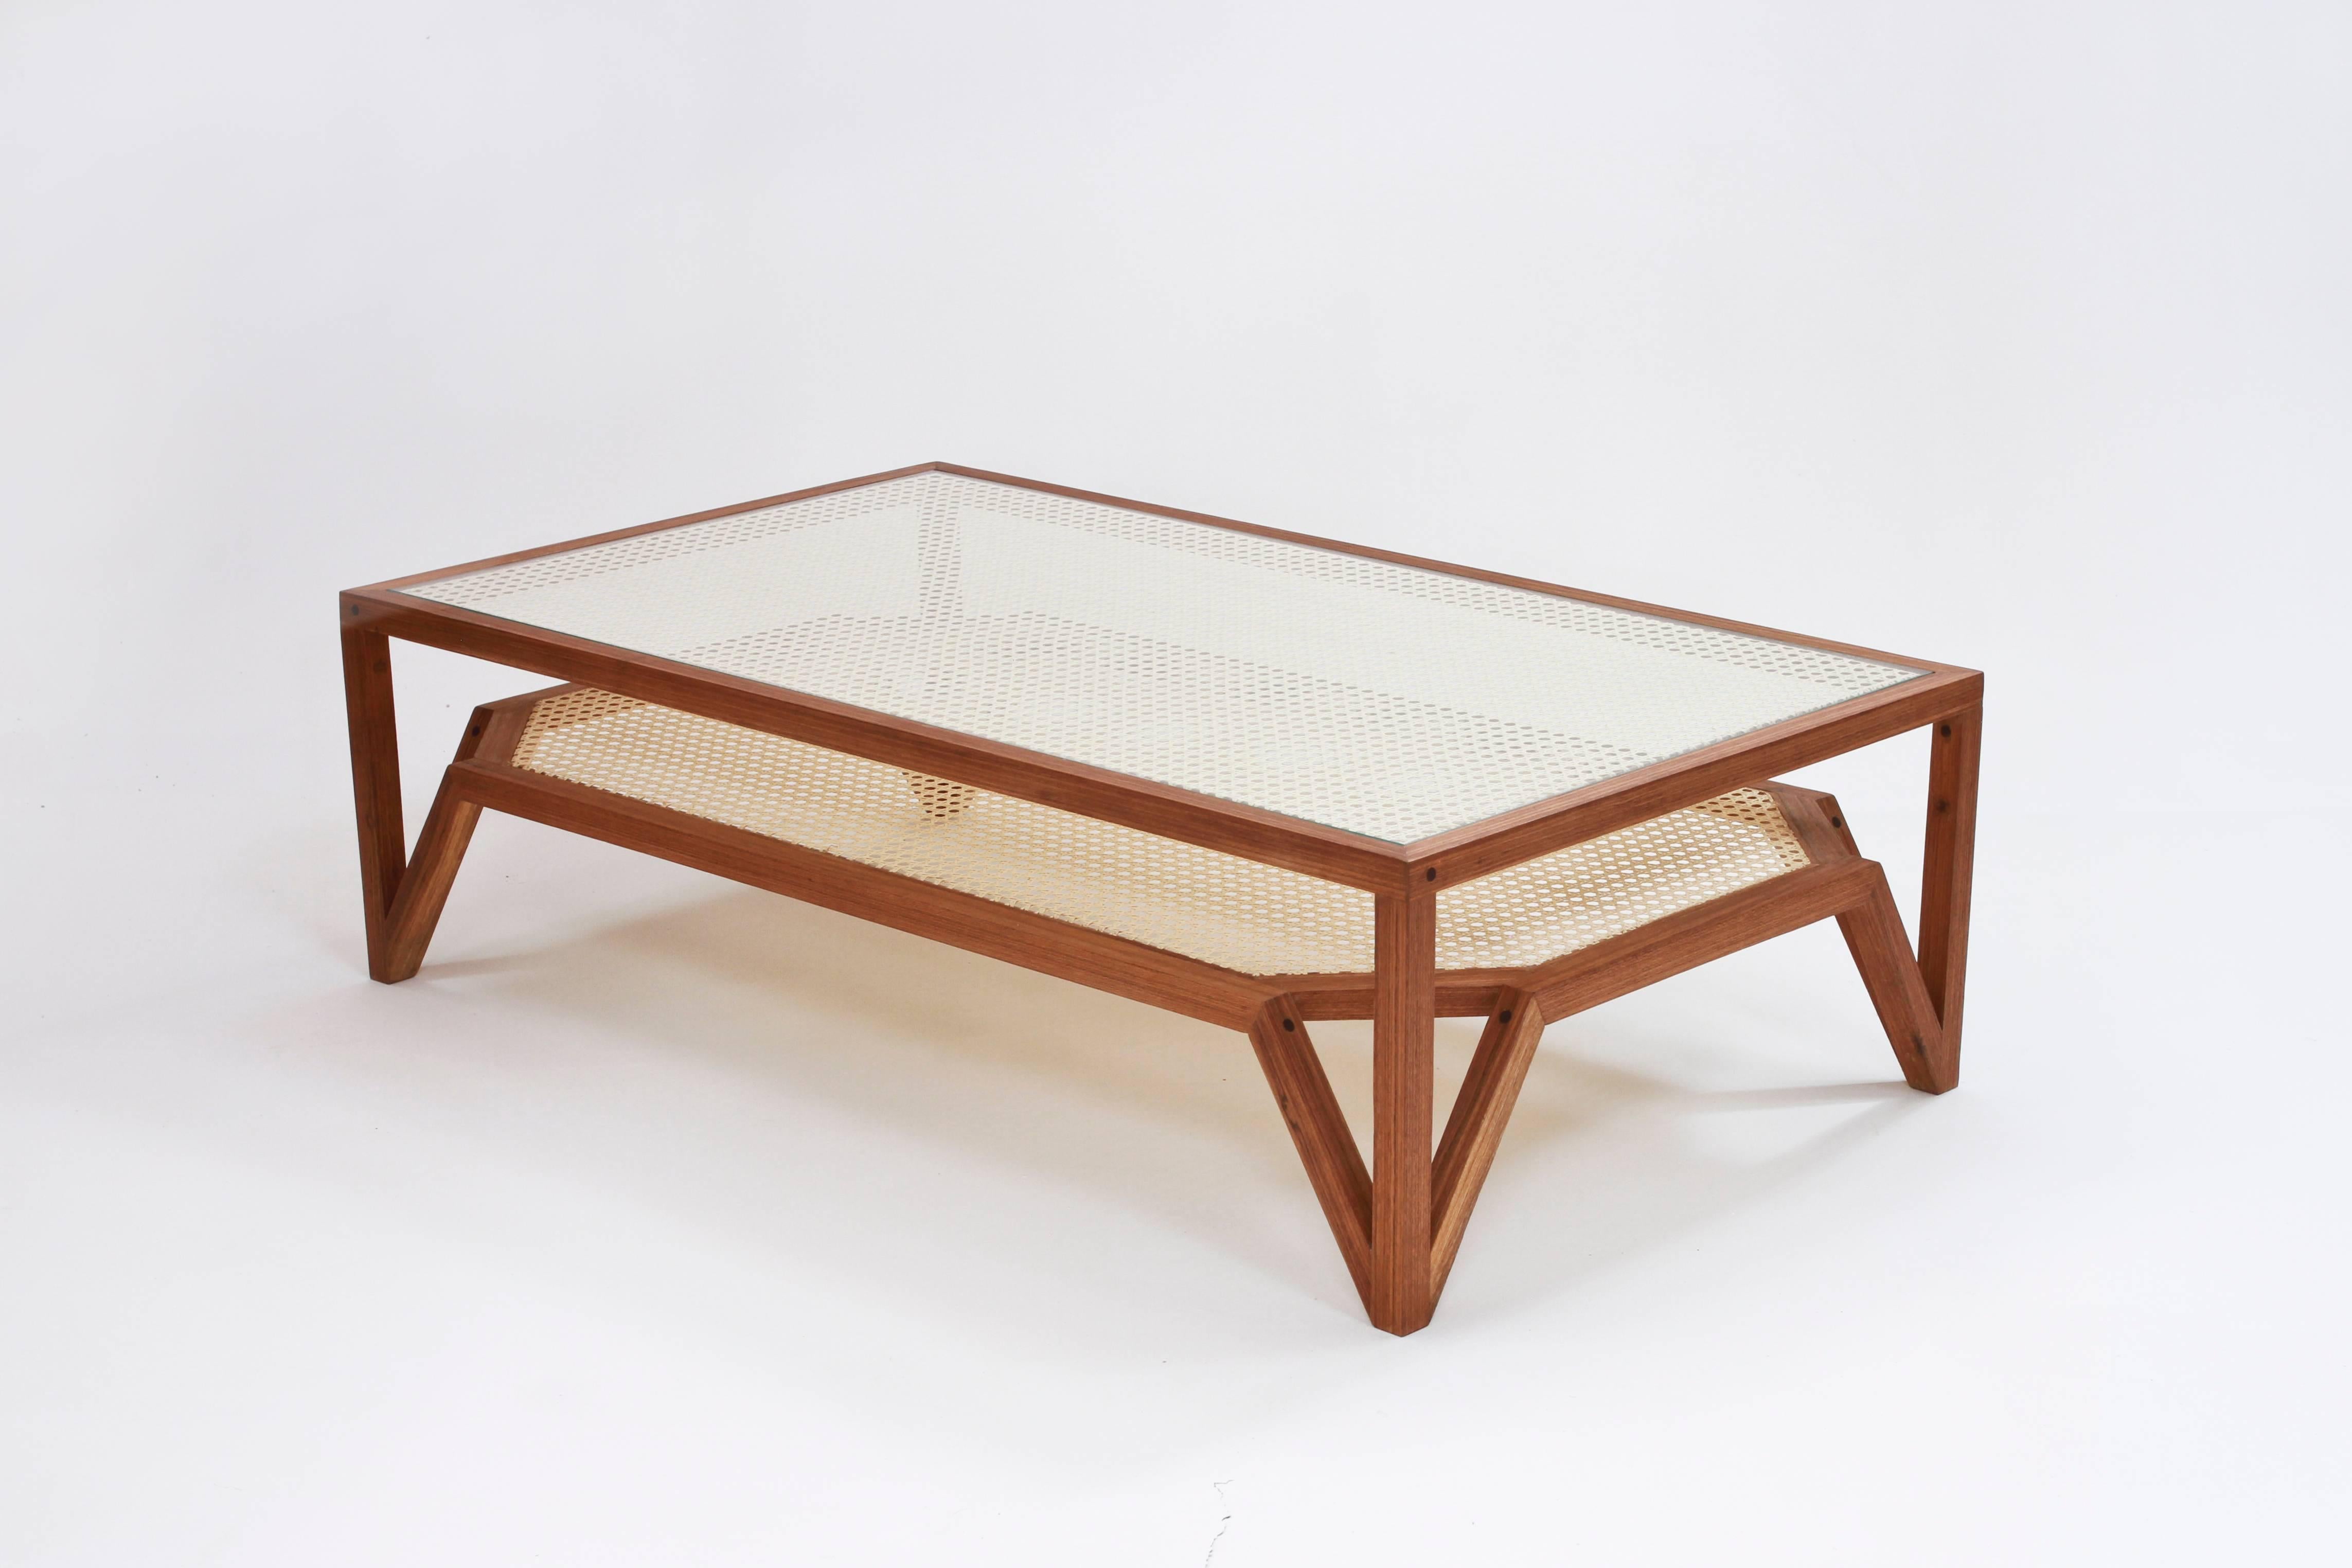 The coffee table was designed to simulate the moiré pattern, a visual effect that occurs when viewing a set of lines or dots that overlaps on another set of lines or dots, where the sets differ in size, angle, or spacing. In order to create this